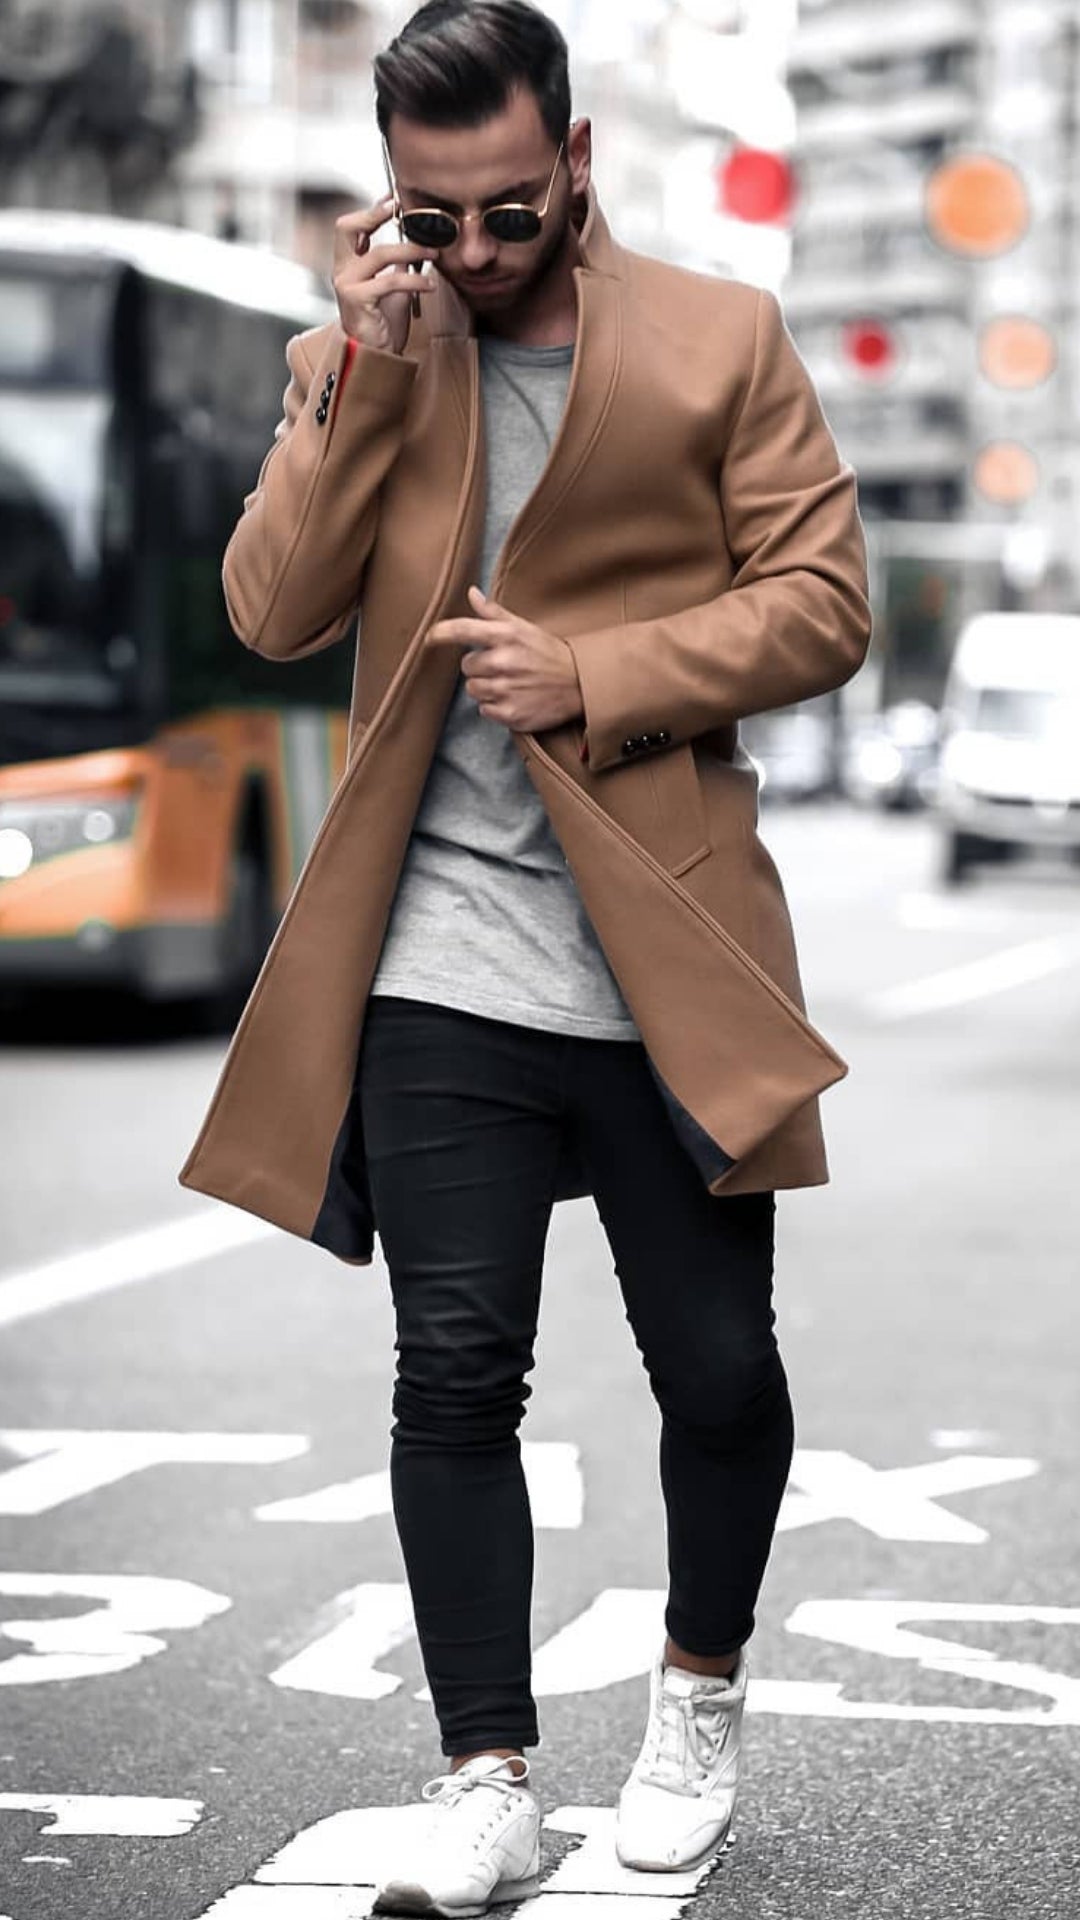 5 Coolest Looks To Steal From This Up-and-Coming Street Style Star # ...